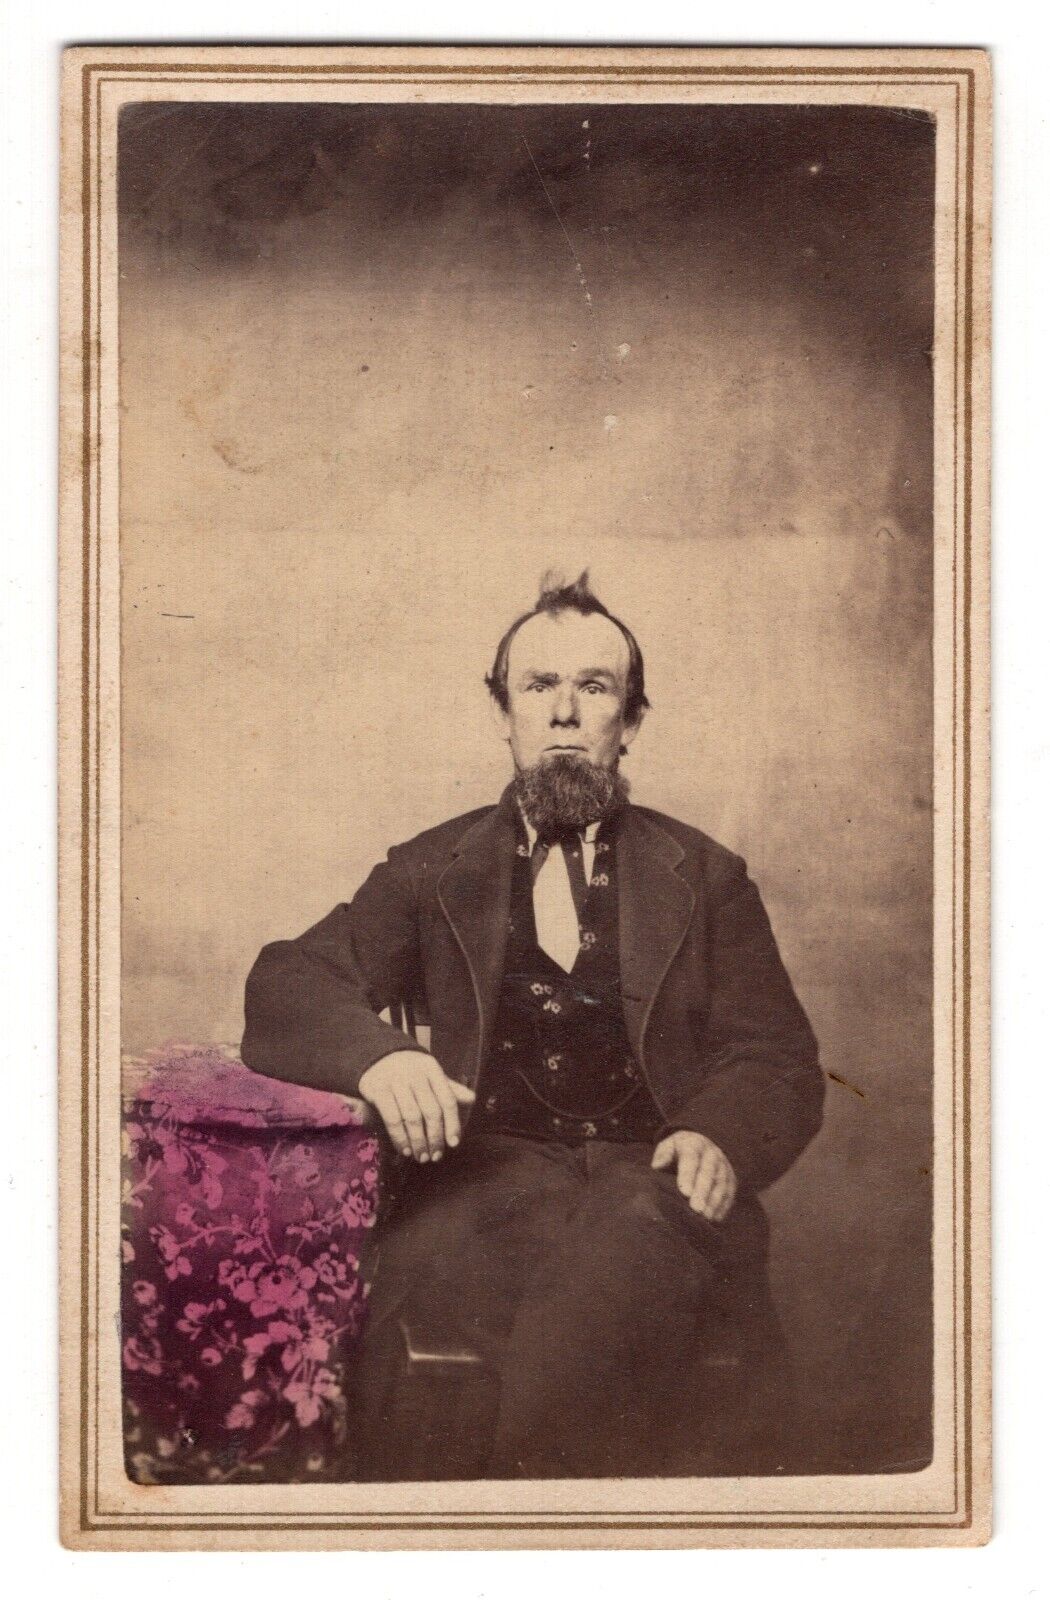 CIRCA 1860s CDV BEARDED MAN IN SUIT SITTING IN CHAIR HAND-TINTED UNMARKED